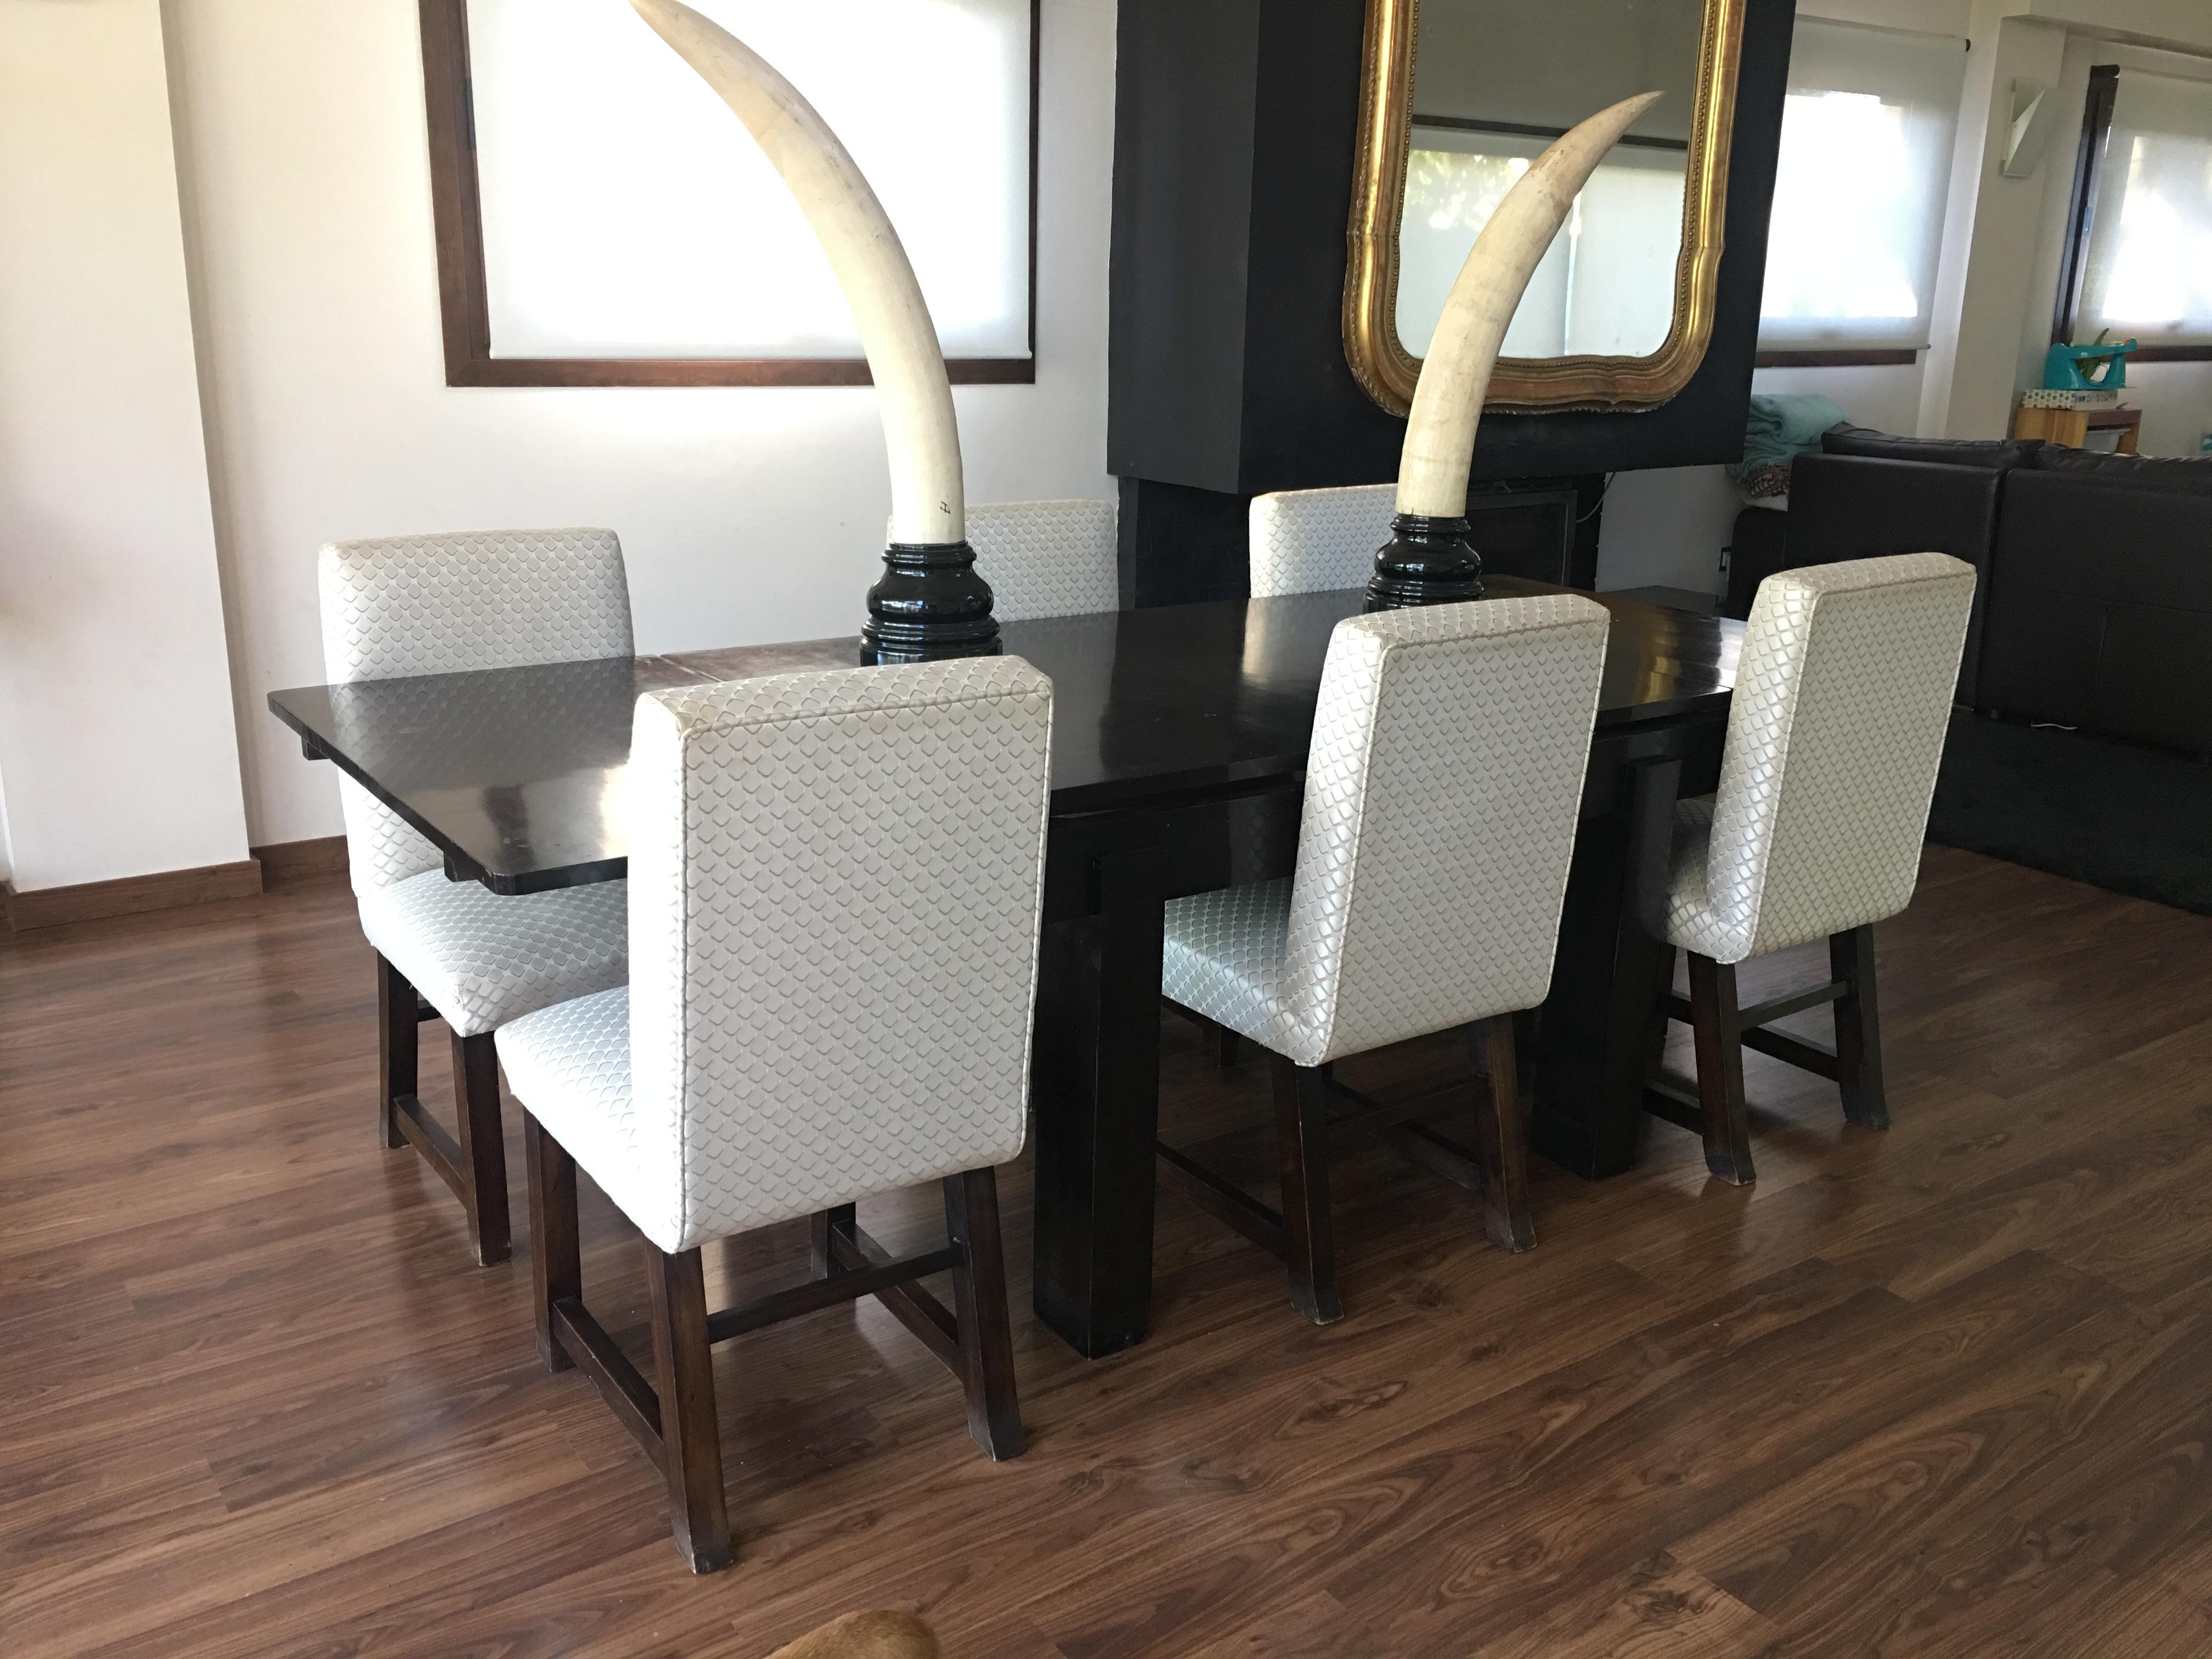 Set of Six Art Deco Dining Chairs with New Upholstery by Lizzo, Italy For Sale 5